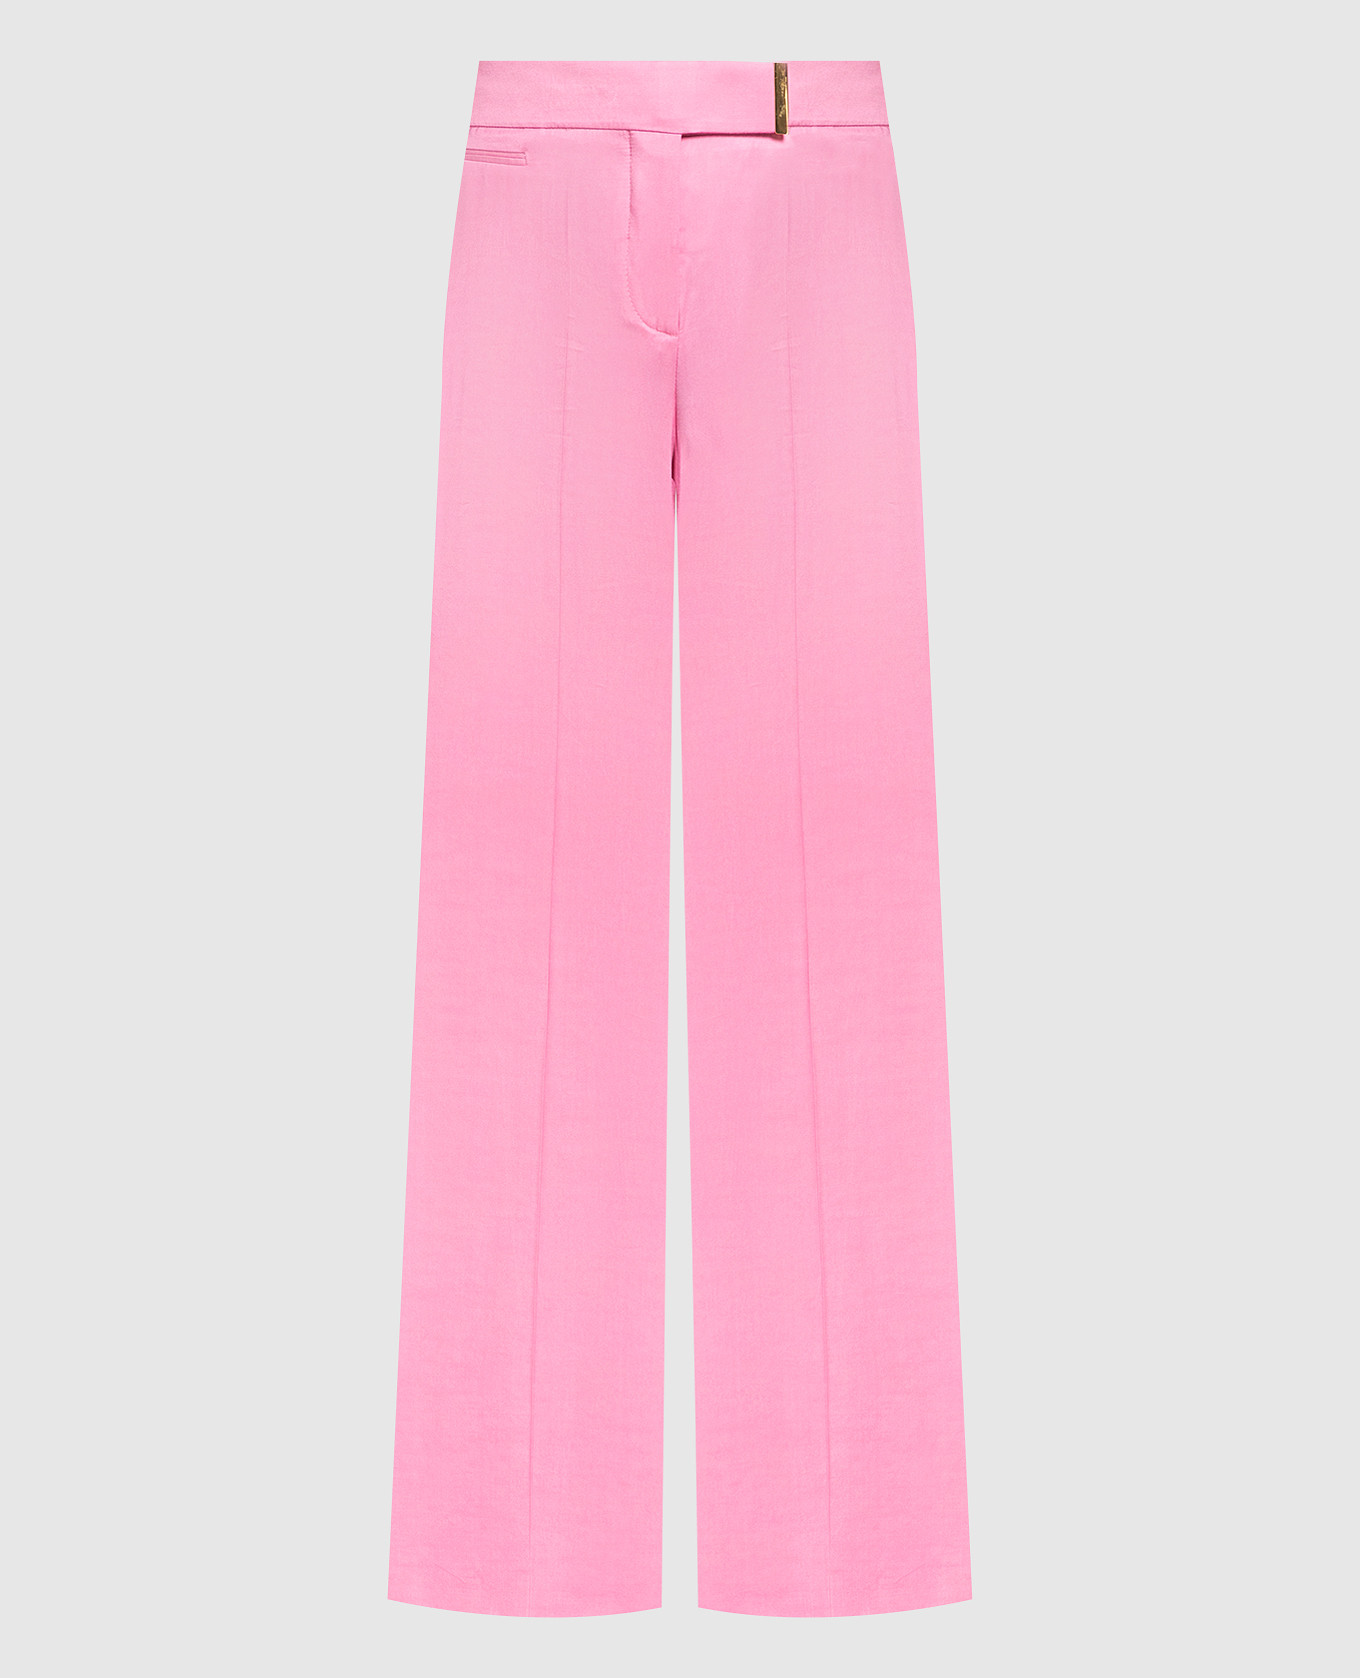 Pink flared pants